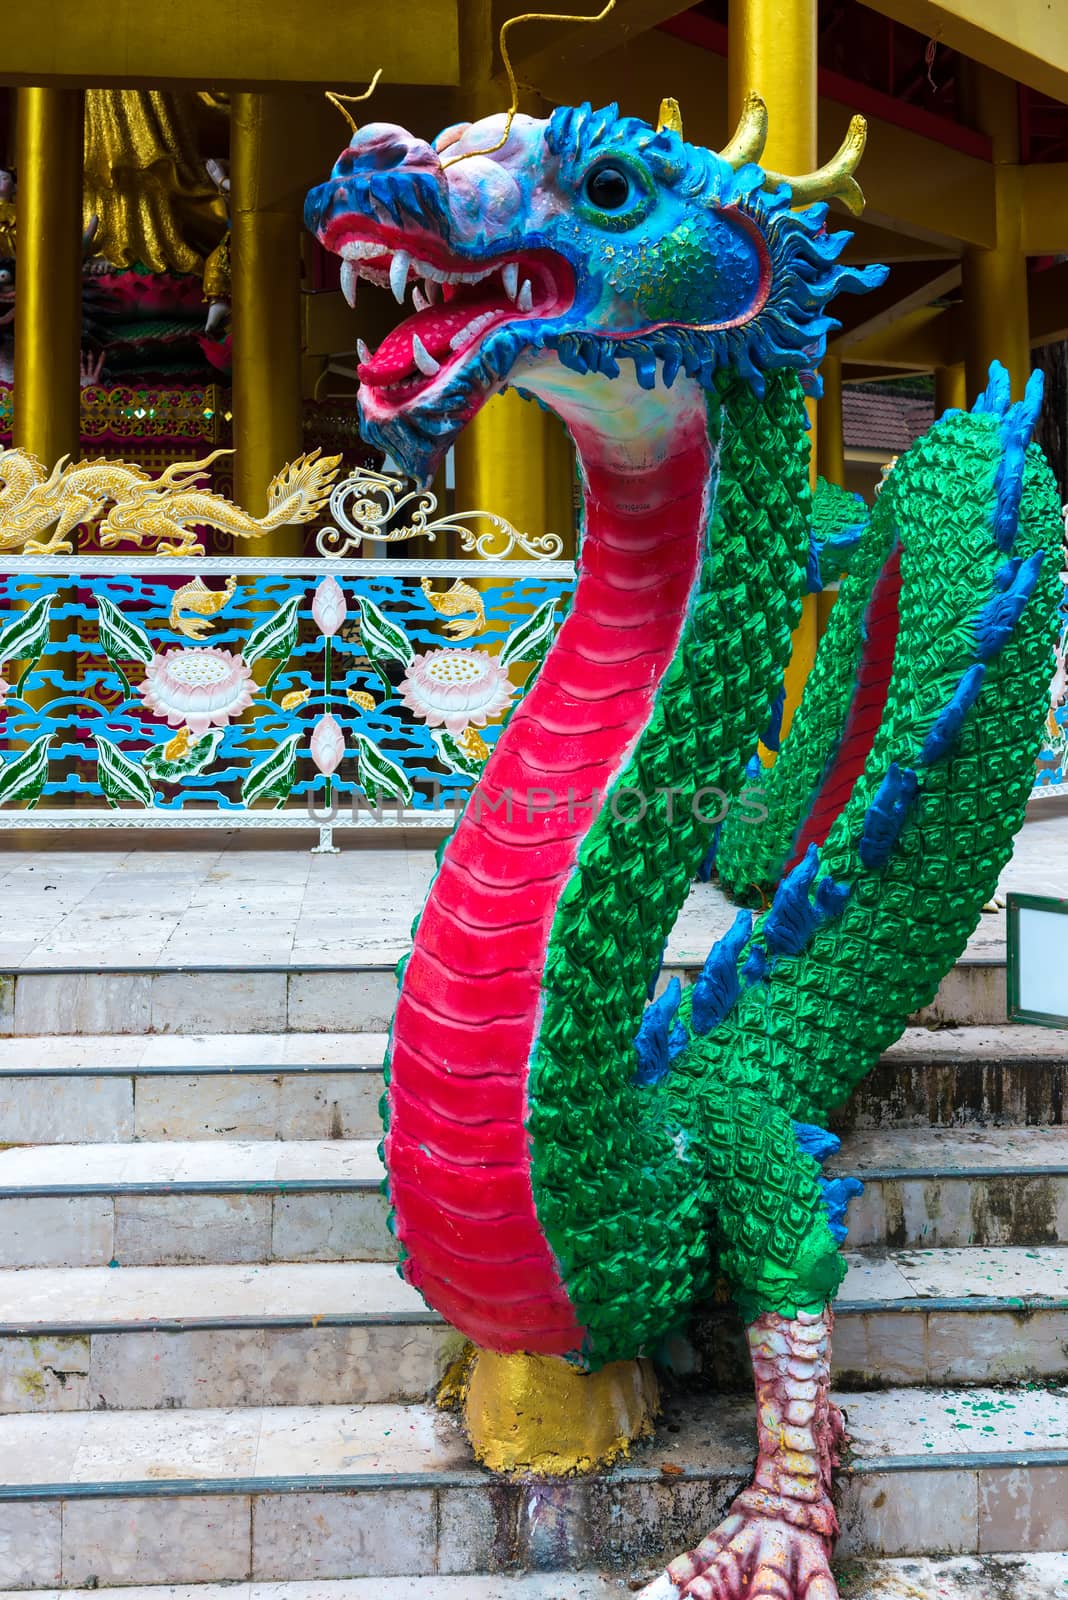 bright multi-colored Chinese dragon - the traditional symbol of the country